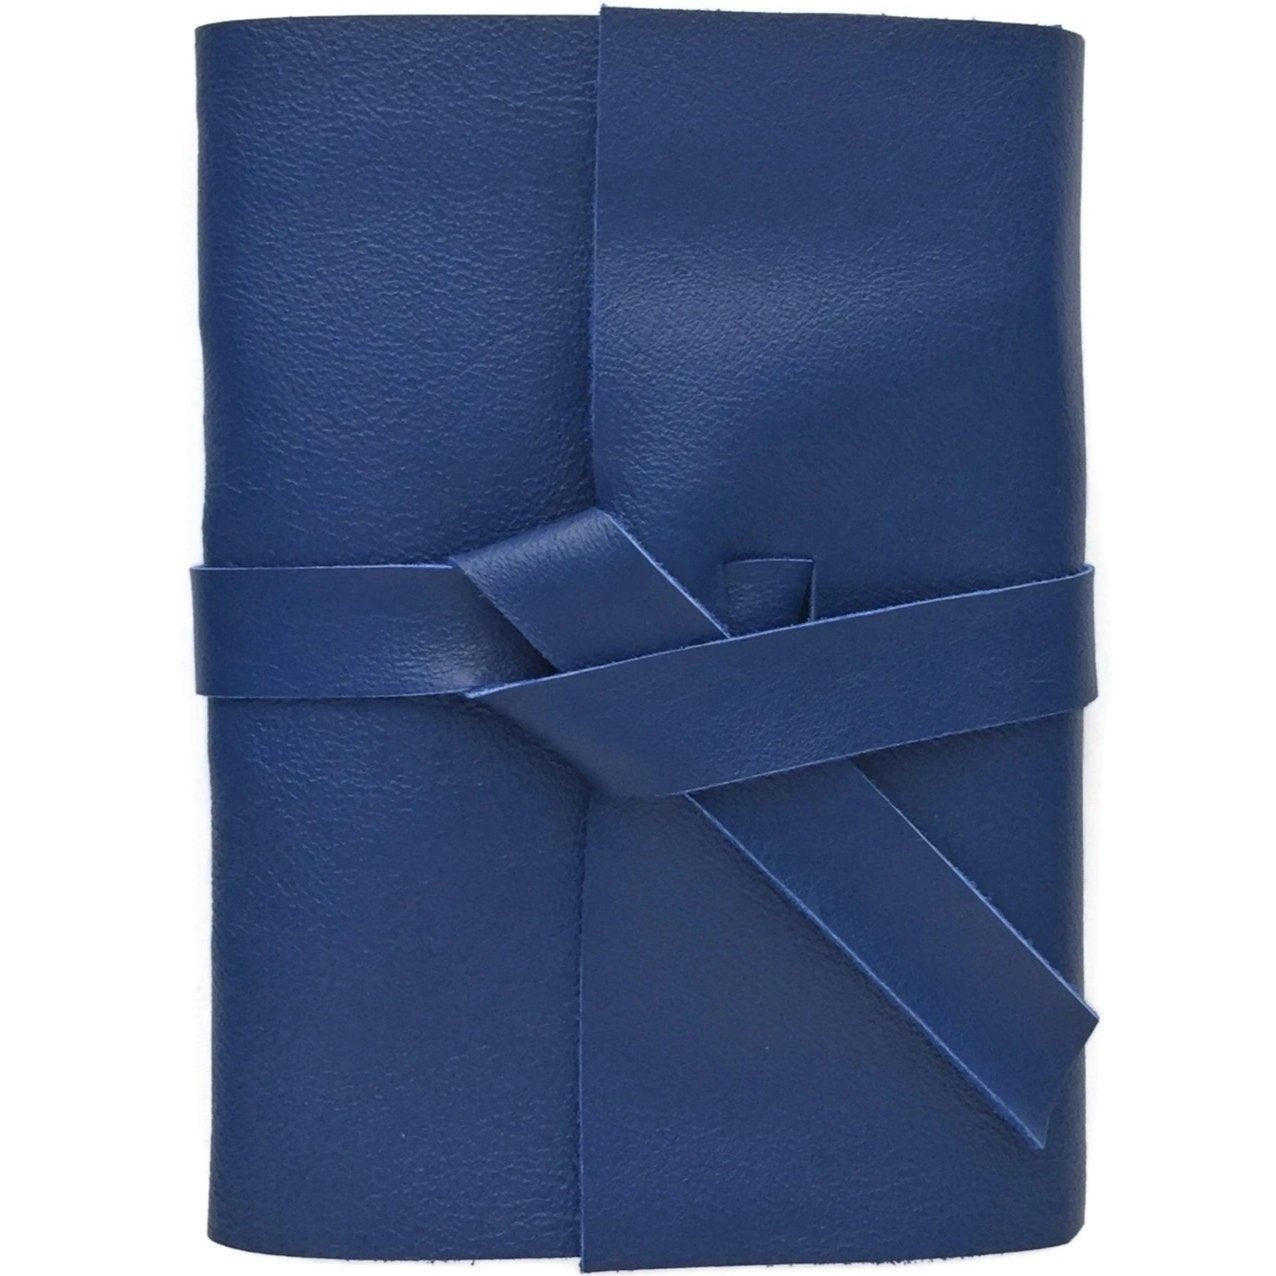 Front view of dark blue leather journal with wrap cover